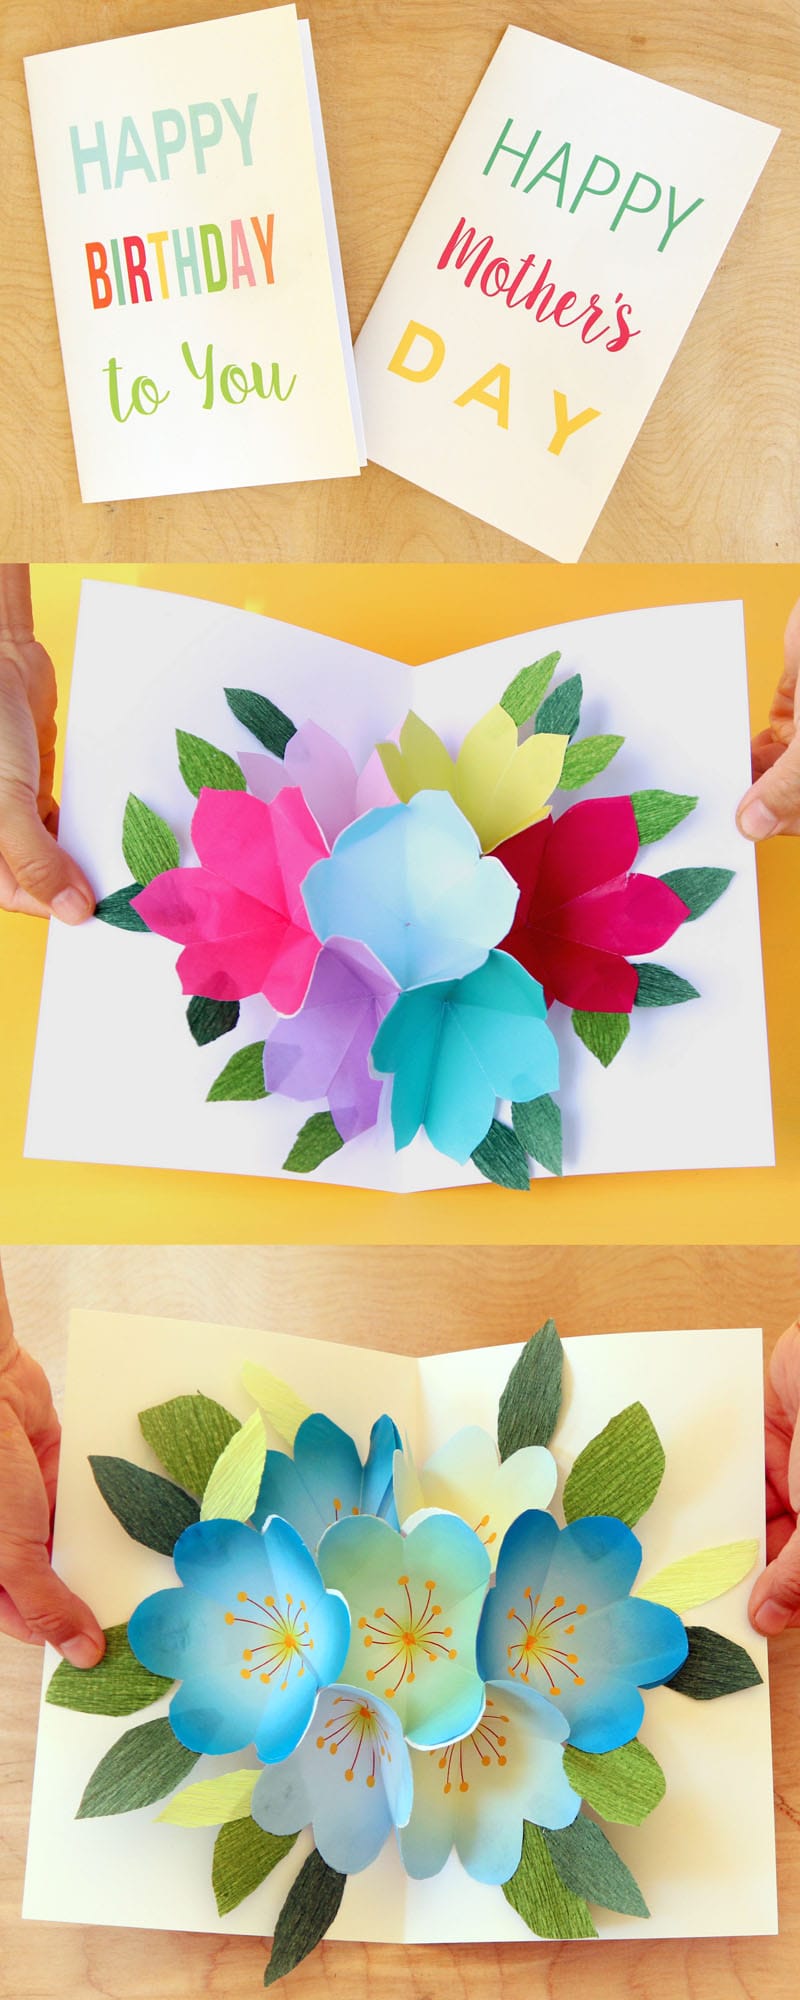 Free Printable Happy Birthday Card with Pop Up Bouquet - A Piece Regarding Pop Up Card Templates Free Printable